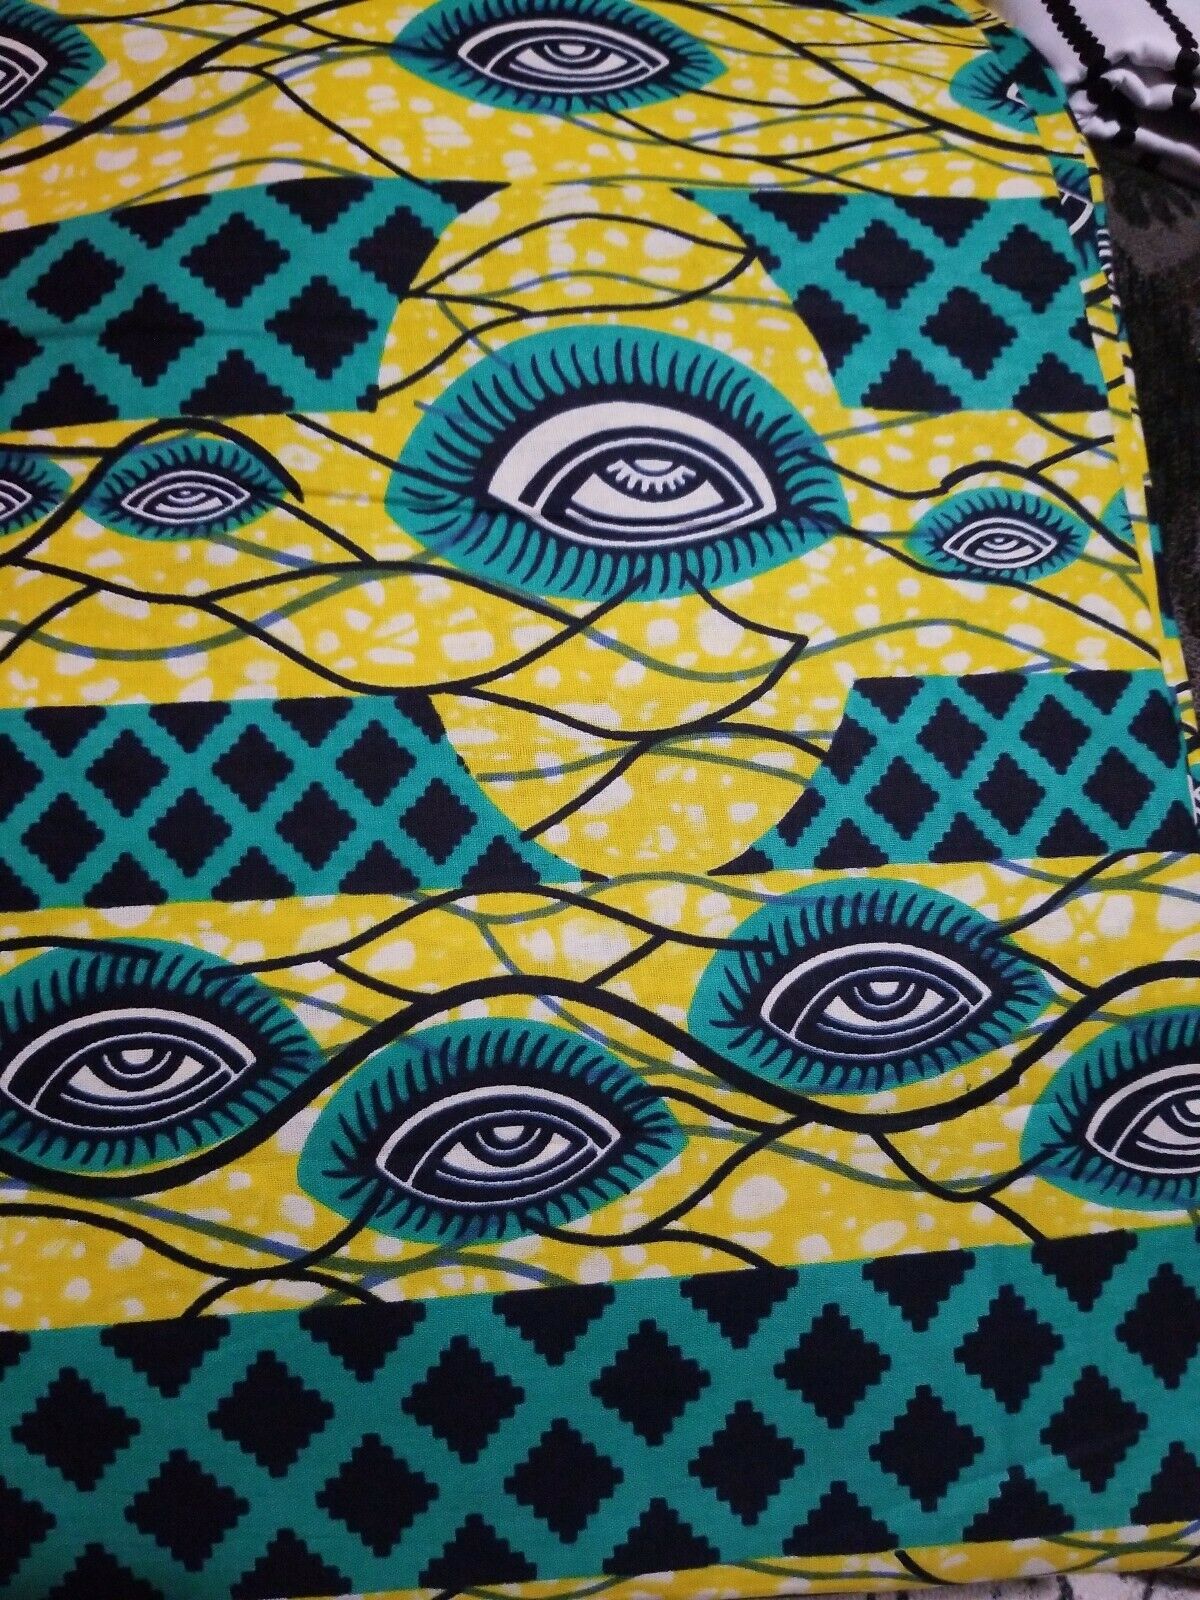 MULTICOLOR African Wax Print 100% Cotton Fabric (44 in.) 3yrds $17